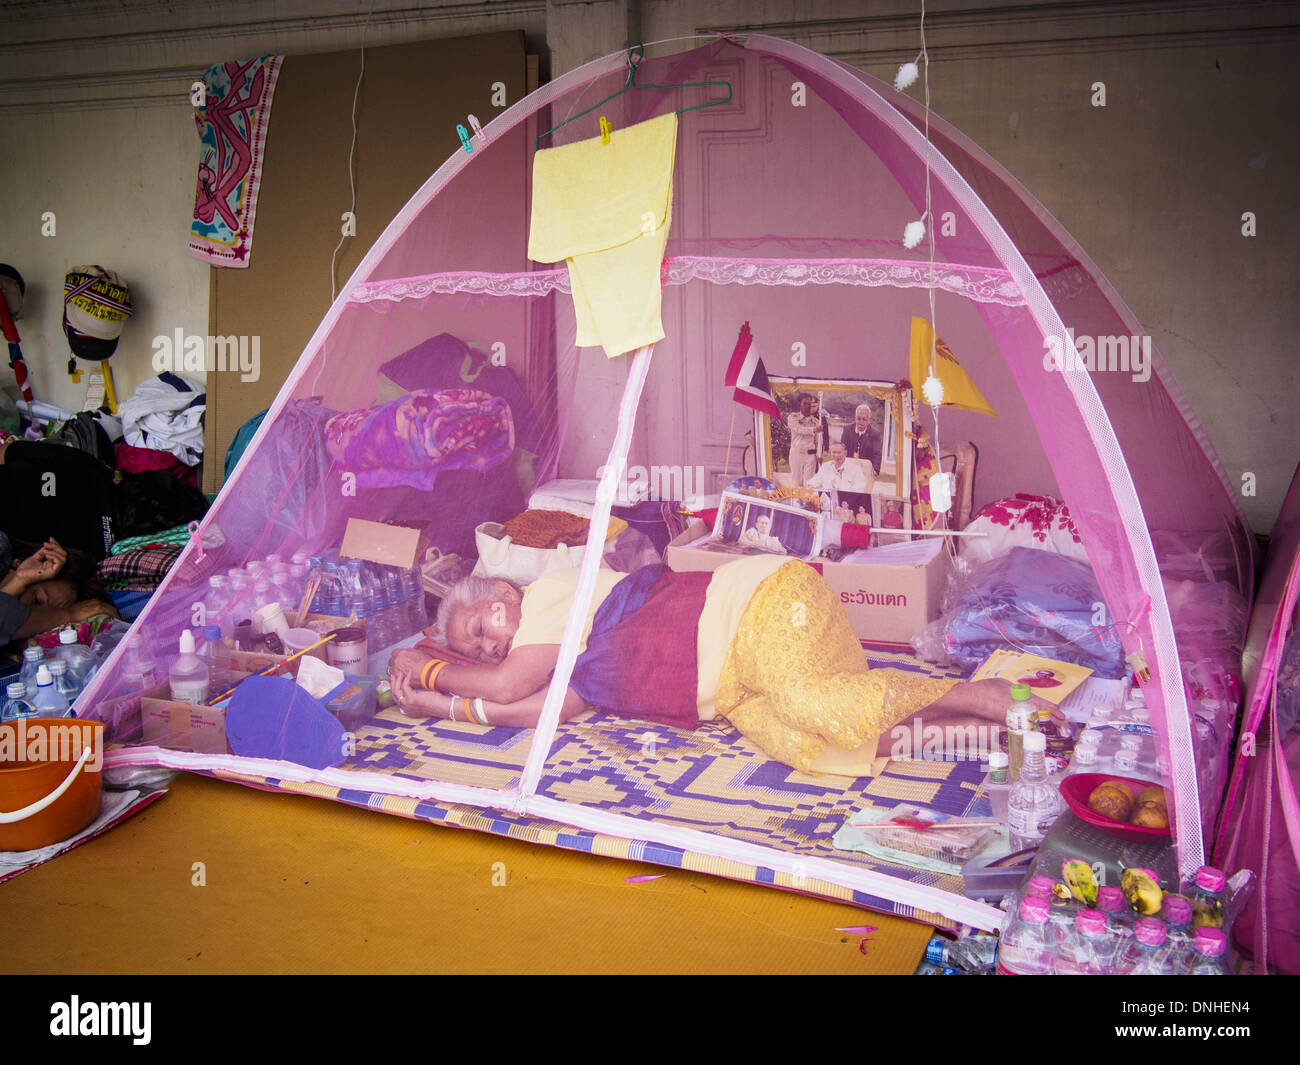 Bangkok, Thailand. 30th Dec, 2013. A woman sleeps in her tent at the anti-government protest site near Government House in Bangkok. She is wearing yellow, the color of the Thai monarchy, and has a picture of Bhumibol Adulyadej, the King of Thailand, in her tent. Most of the protestors are ultra monarchists. Violence around the anti-government protest sites has escalated in recent days and several protestors have been hurt by small explosive devices thrown at their guard posts. As a result, protestors are fortifying their positions with sandbags and bunkers. Credit:  ZUMA Press, Inc./Alamy Live Stock Photo